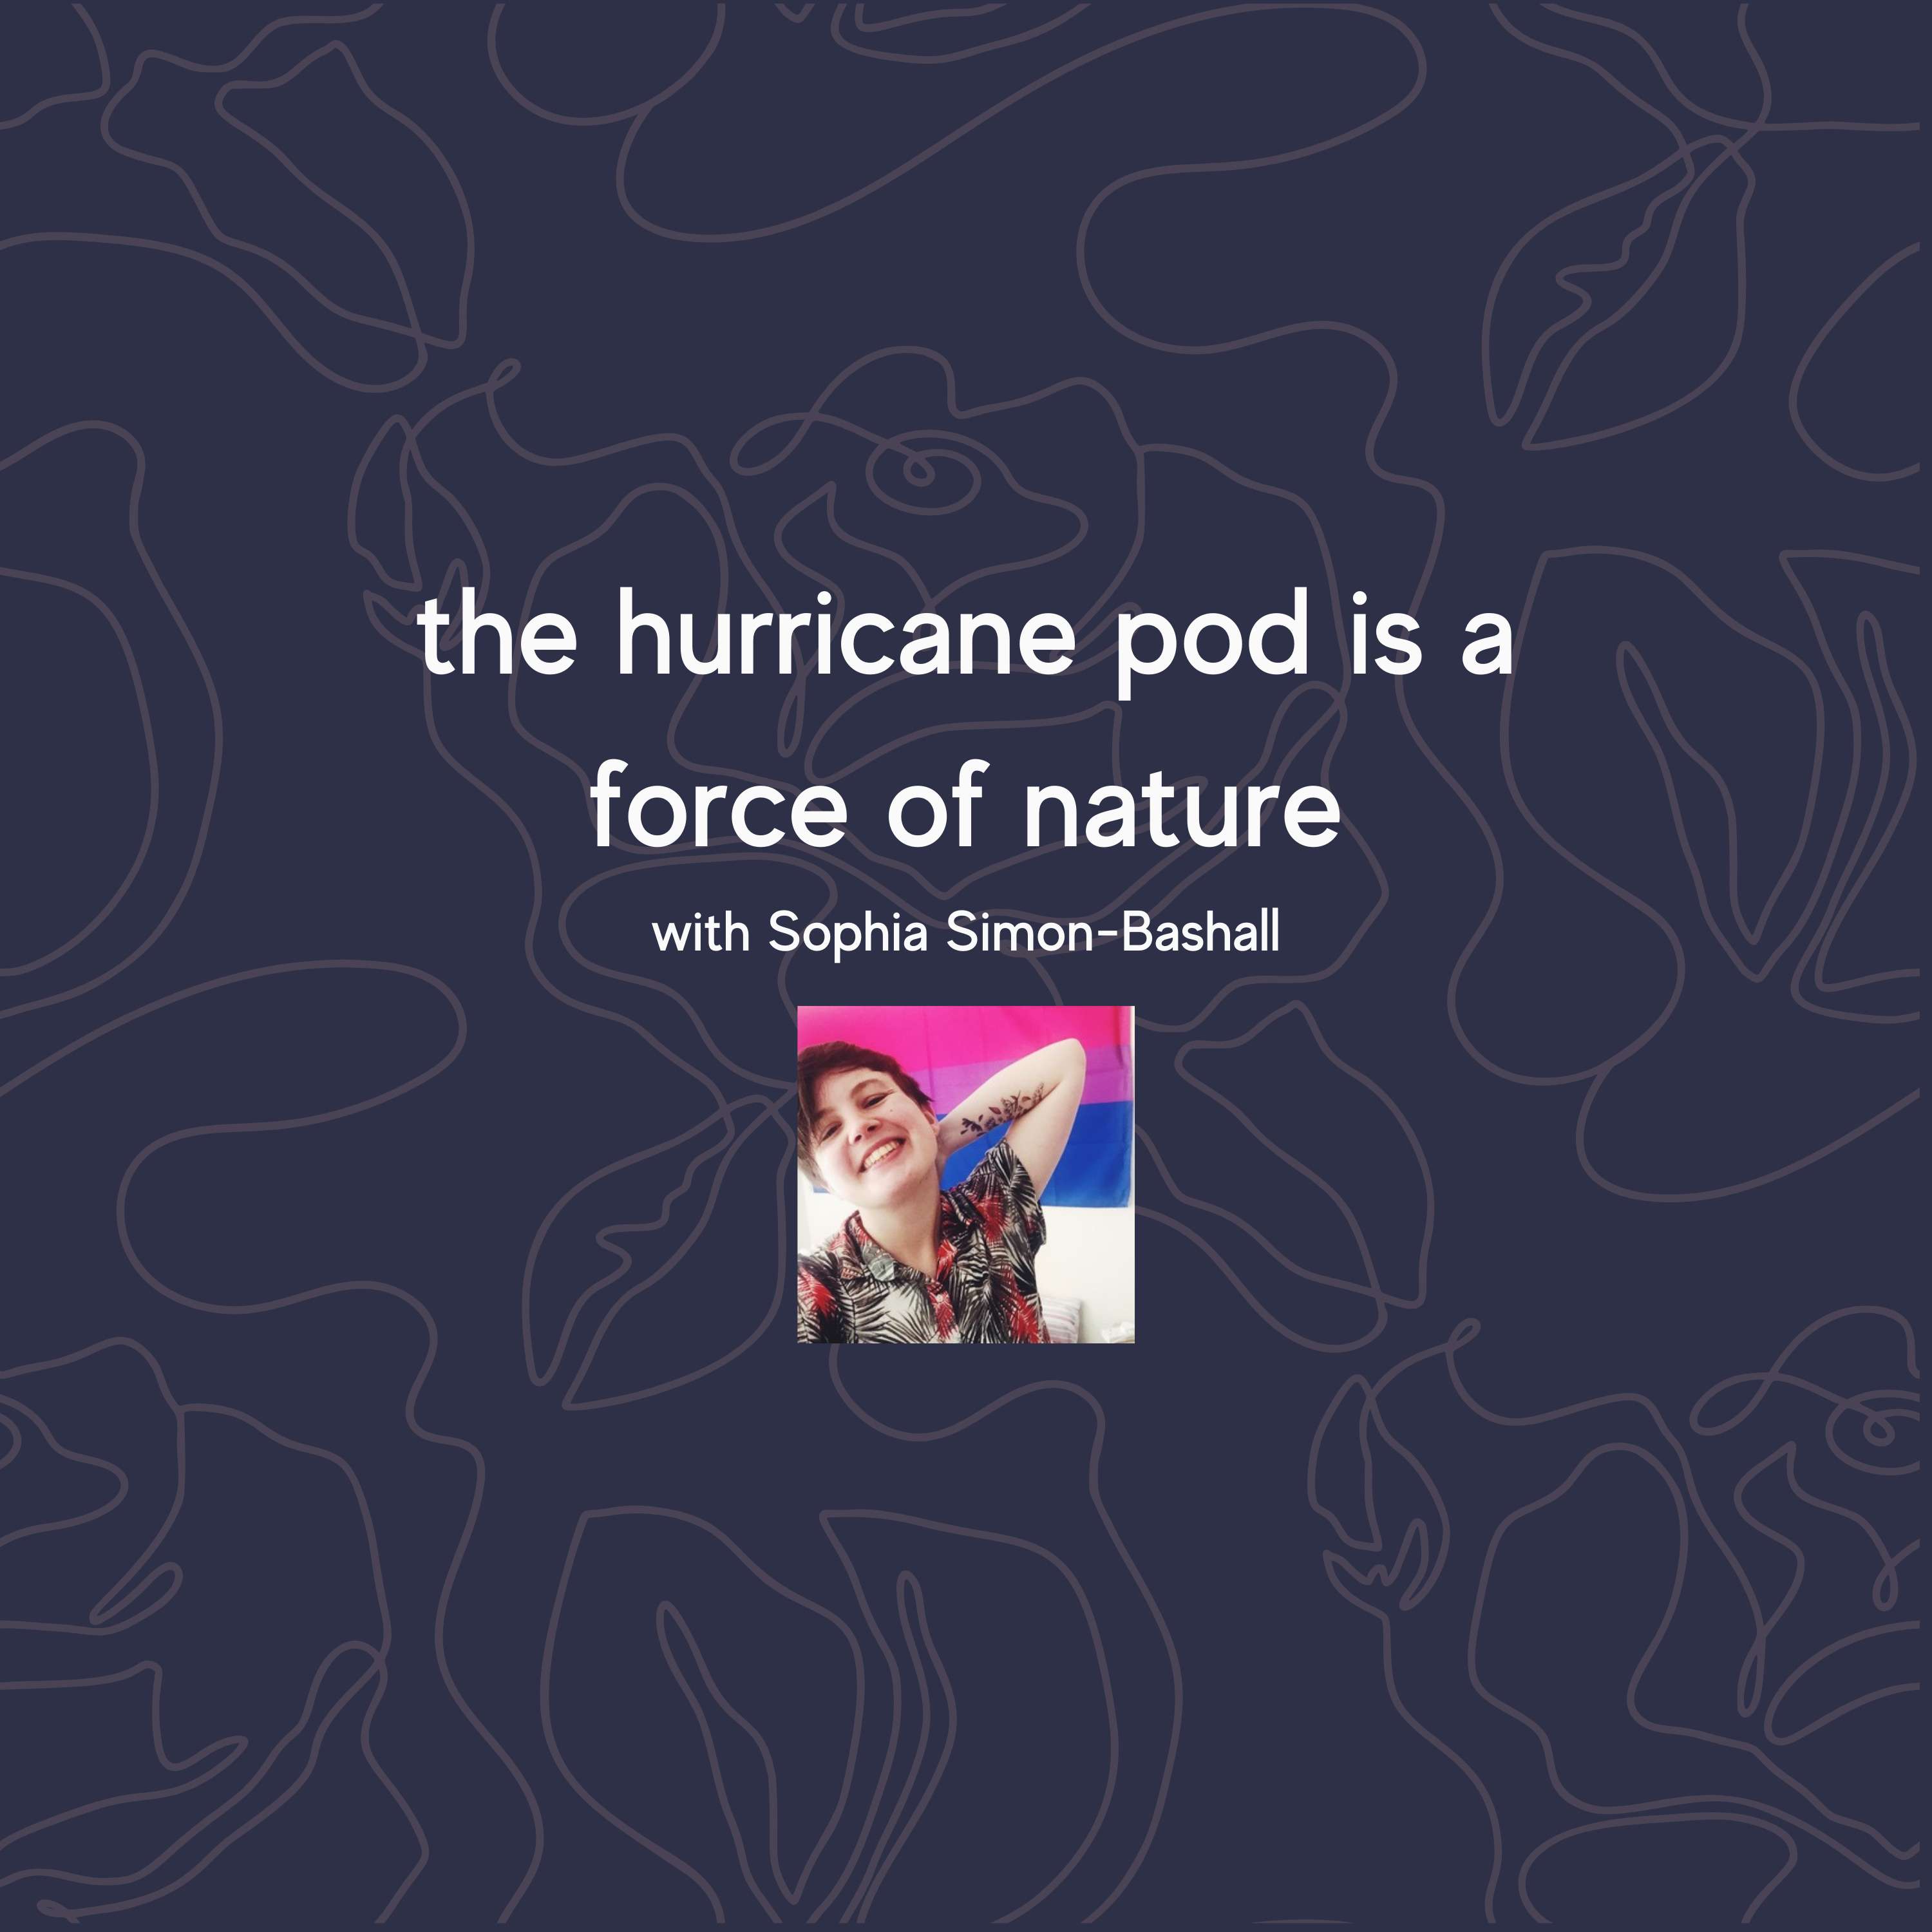 the hurricane pod is a force of nature with Sophia Simon-Bashall